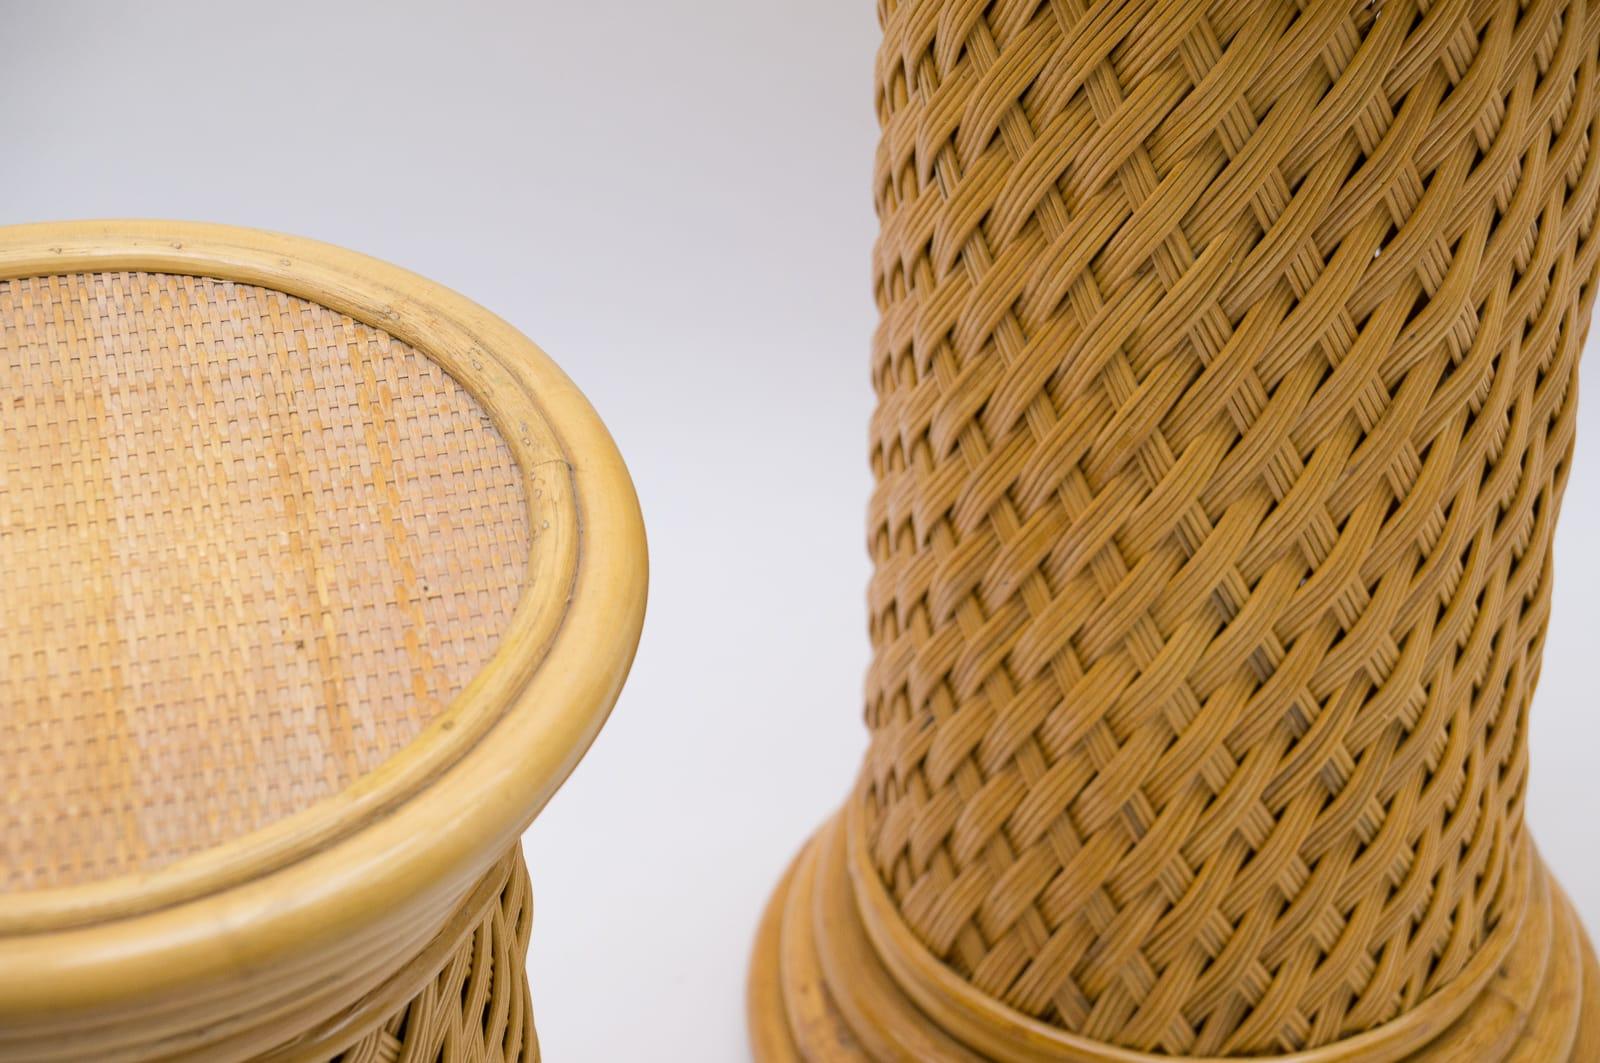 2 Elegant Hollywood Regency Rattan Wicker and Bamboo Columns, 1960s, Italy For Sale 5